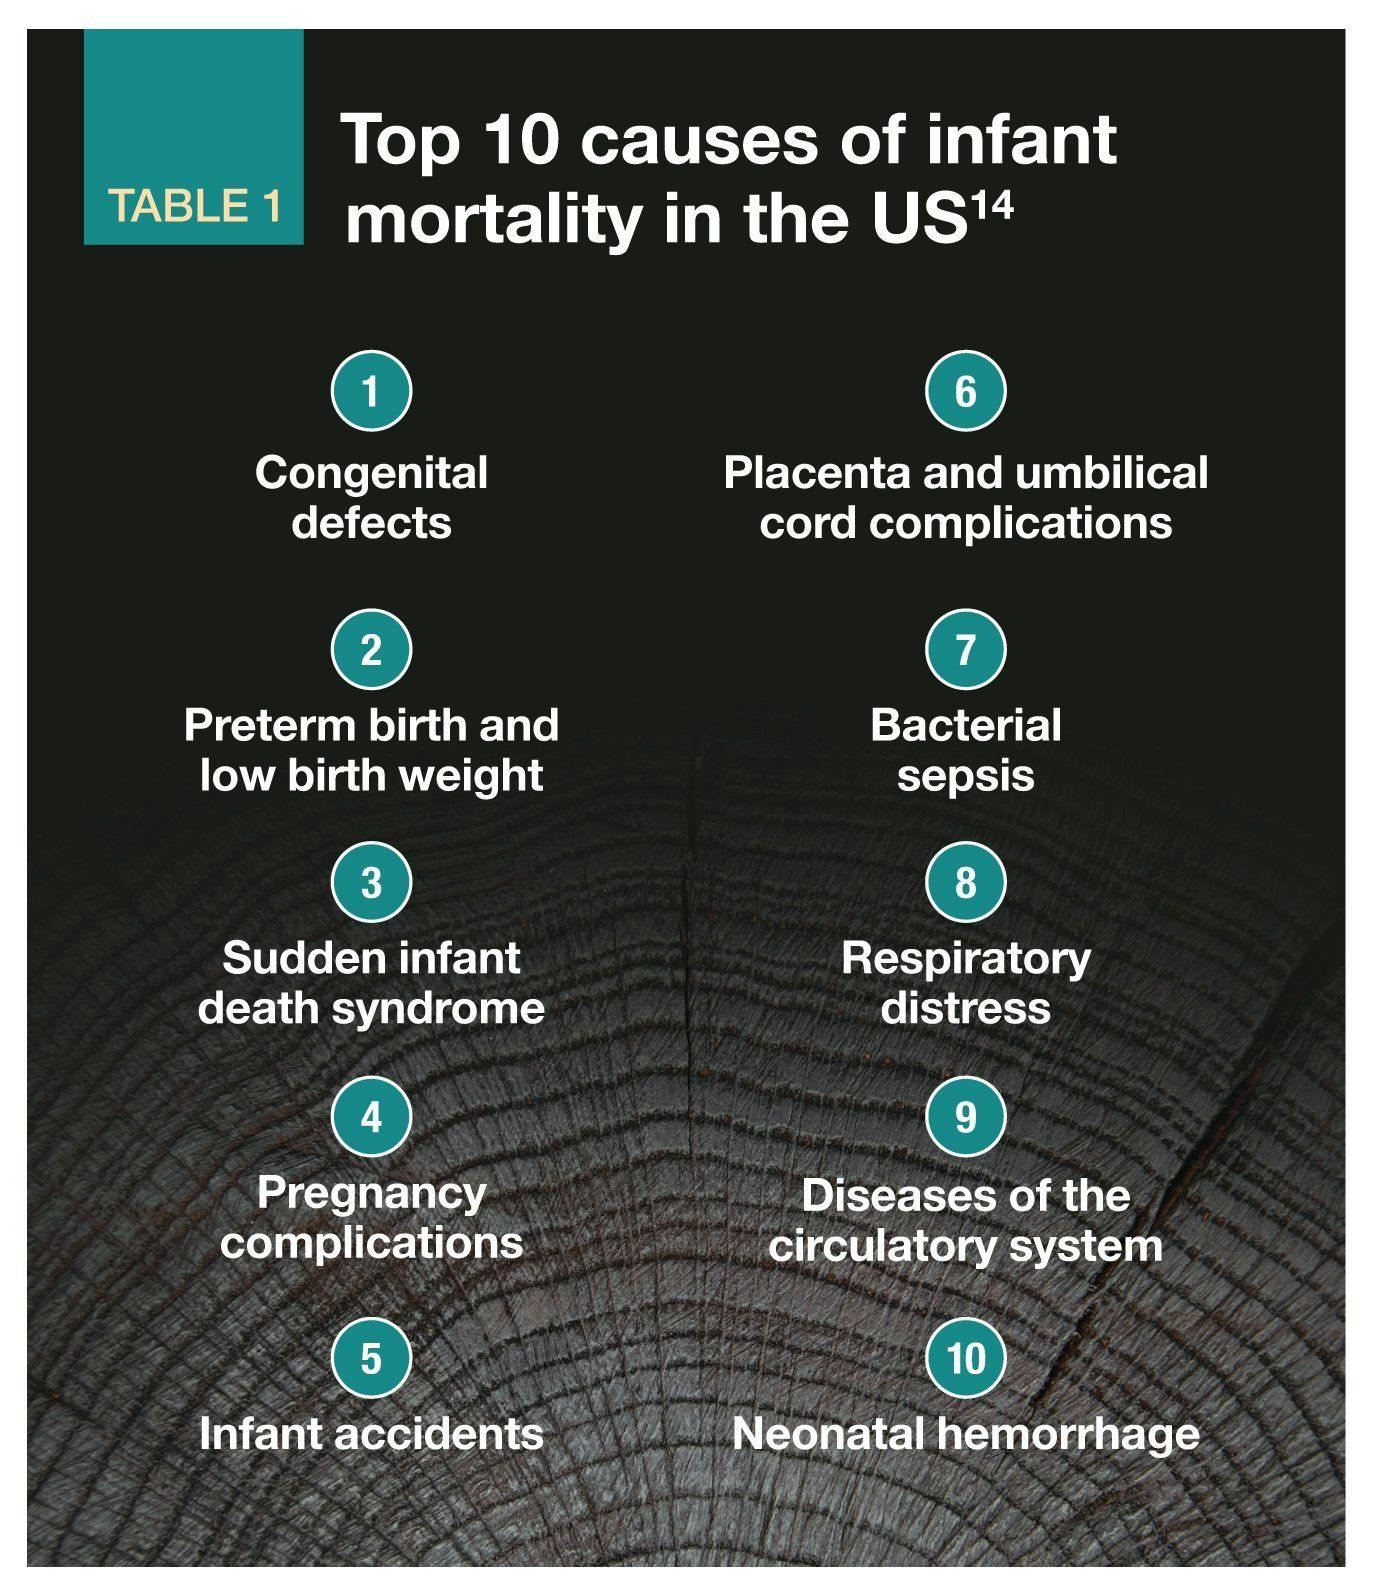 Top 10 causes of infant mortality in the US